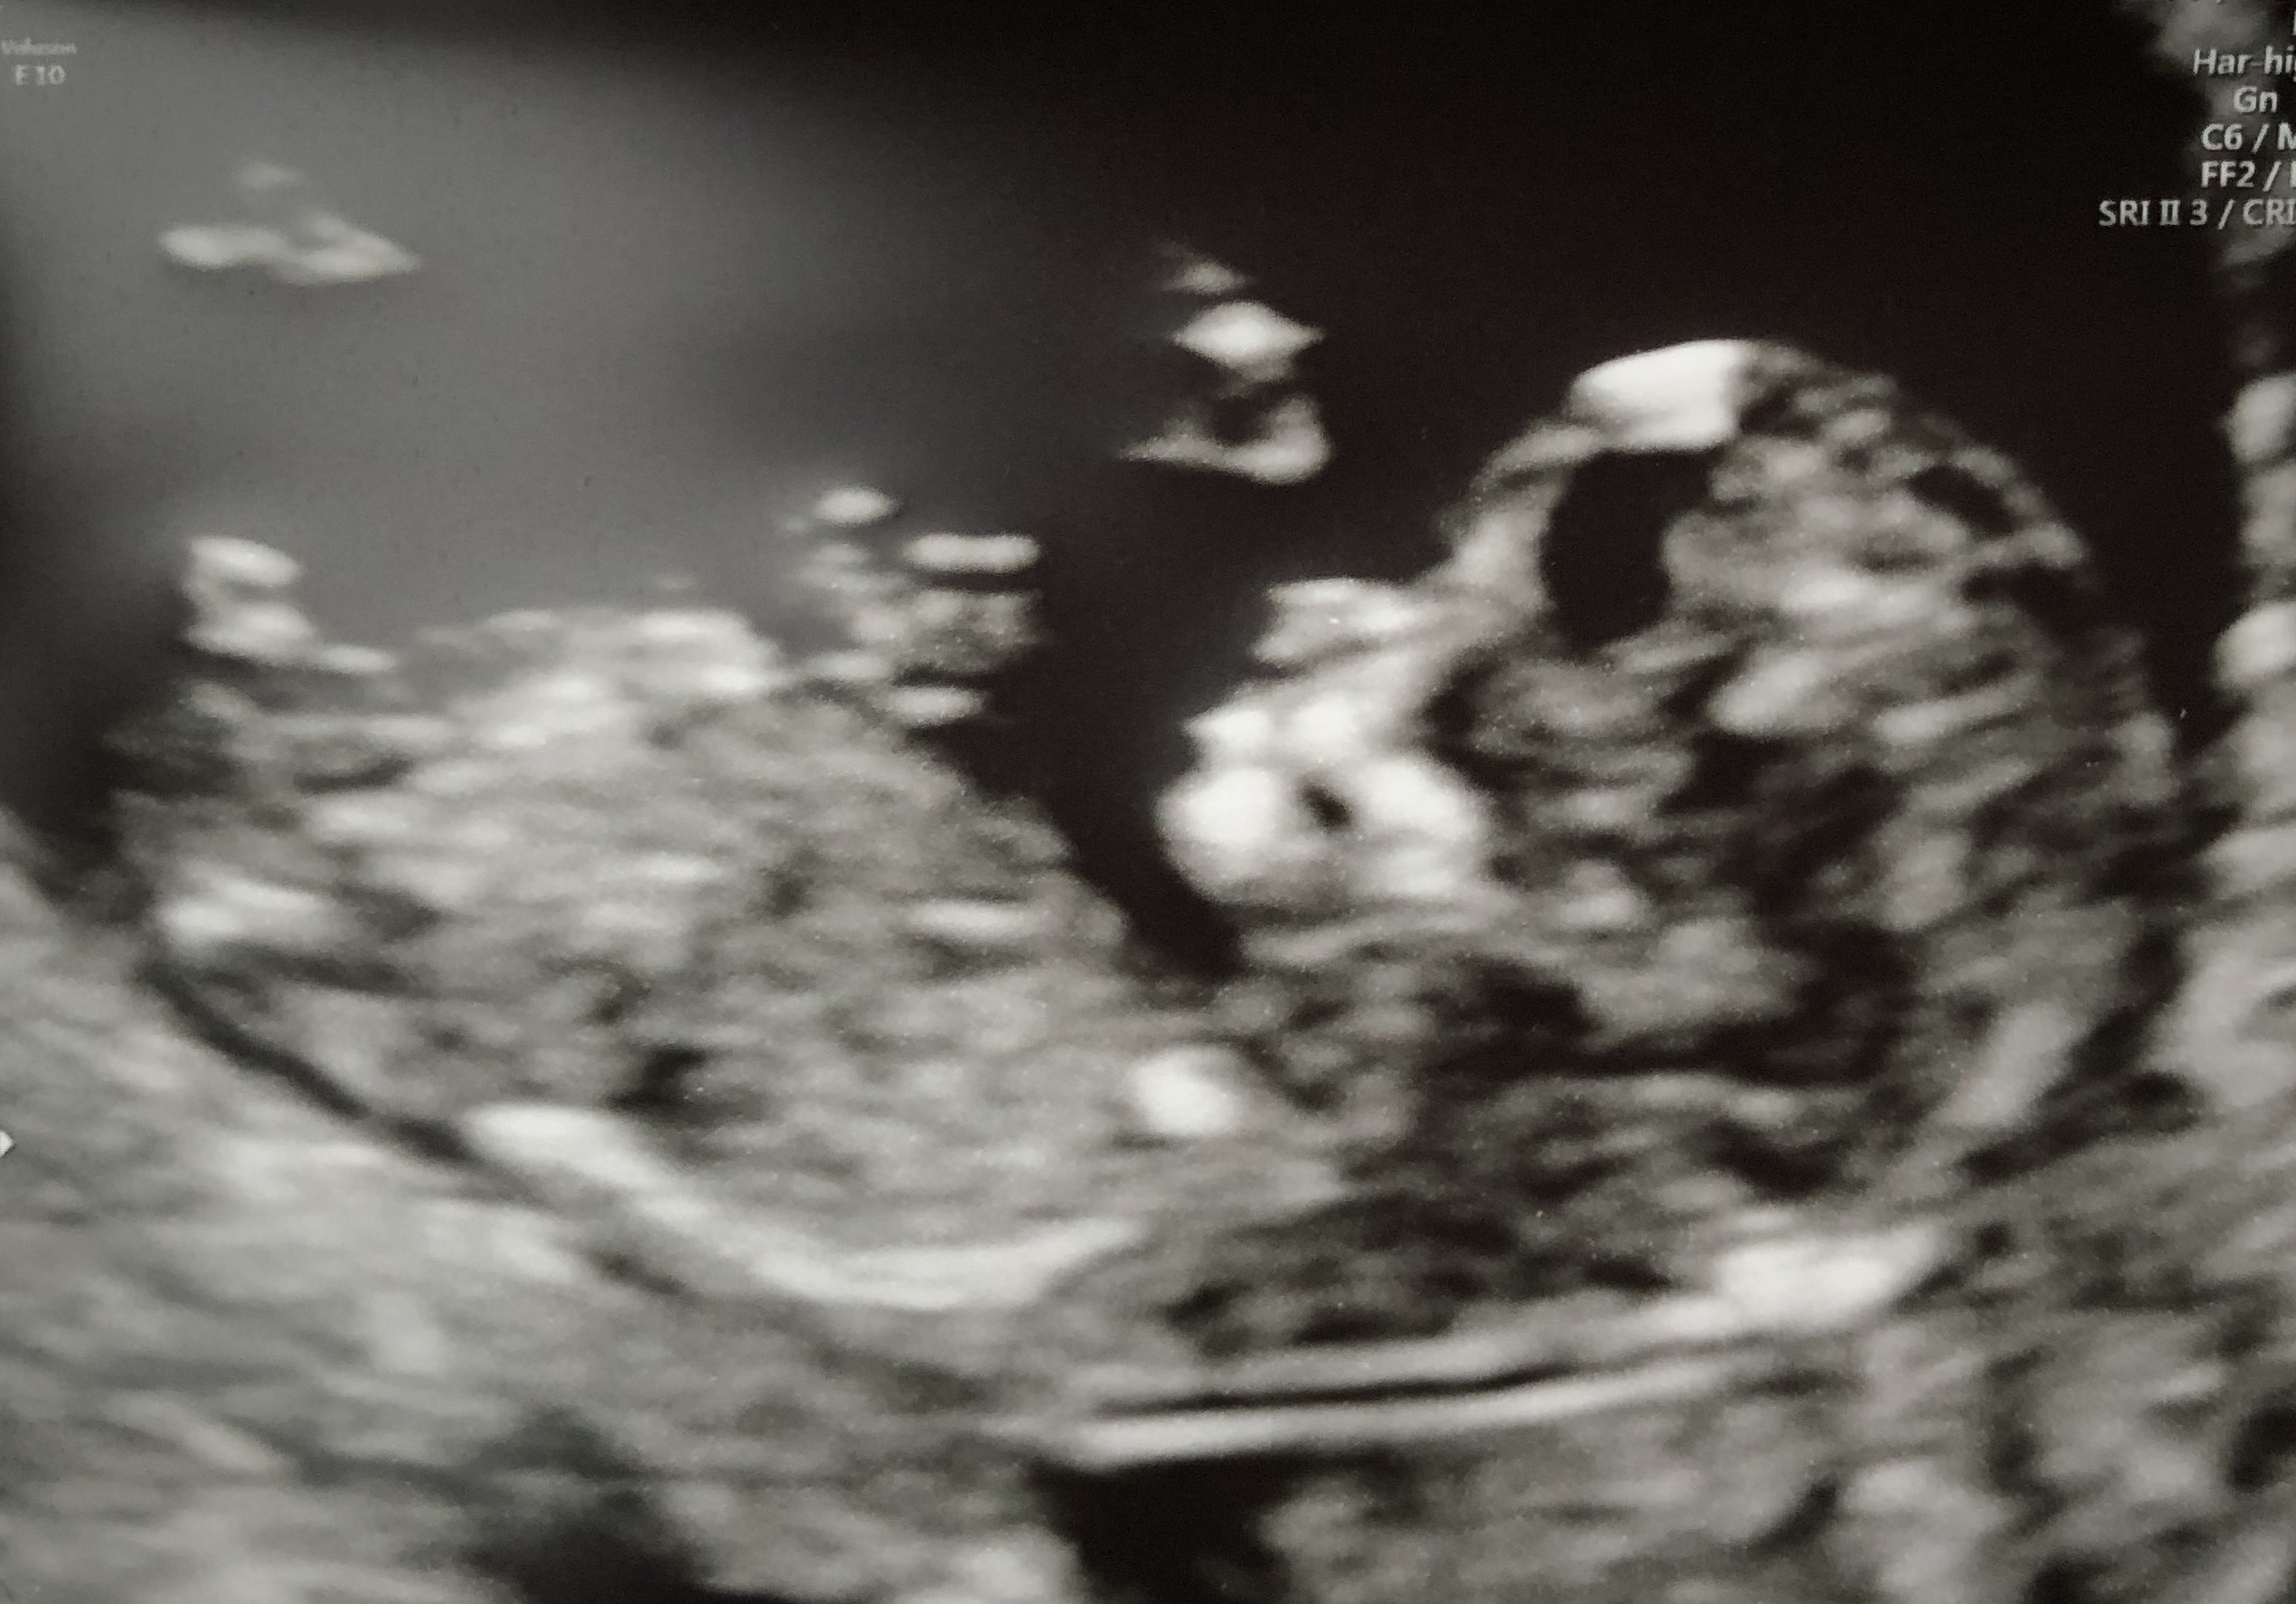 12 week scan, baby is much more visible and has an obvious head and body